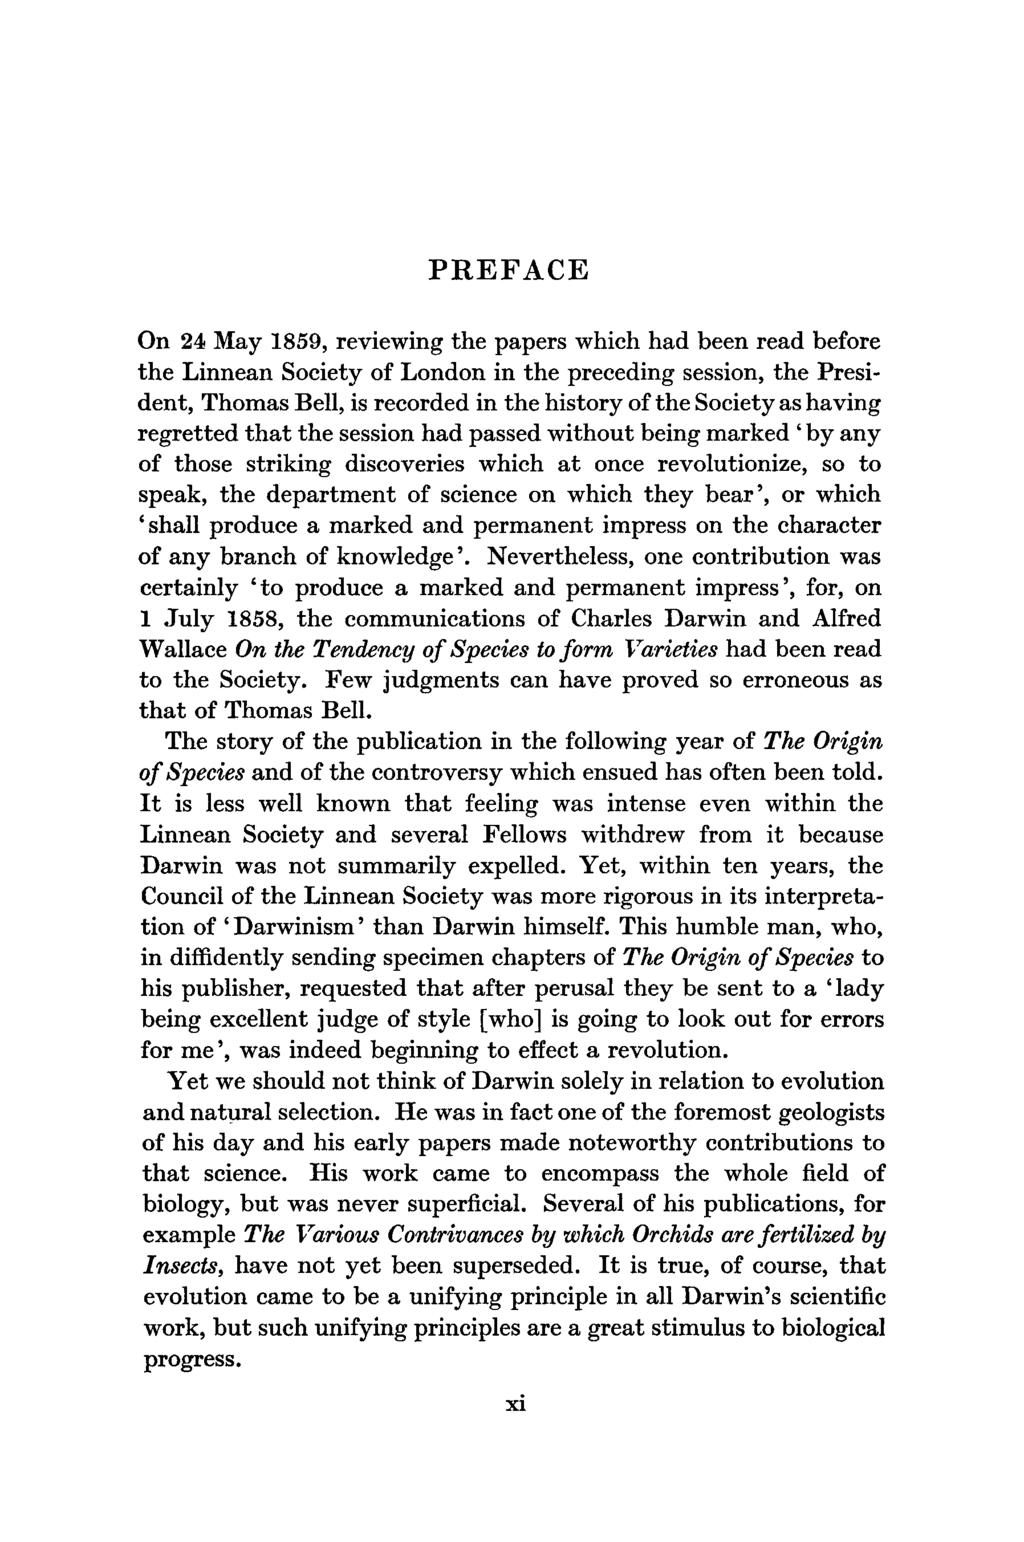 PREFACE On 24 May 1859, reviewing the papers which had been read before the Linnean Society of London in the preceding session, the President, Thomas Bell, is recorded in the history of the Societyas